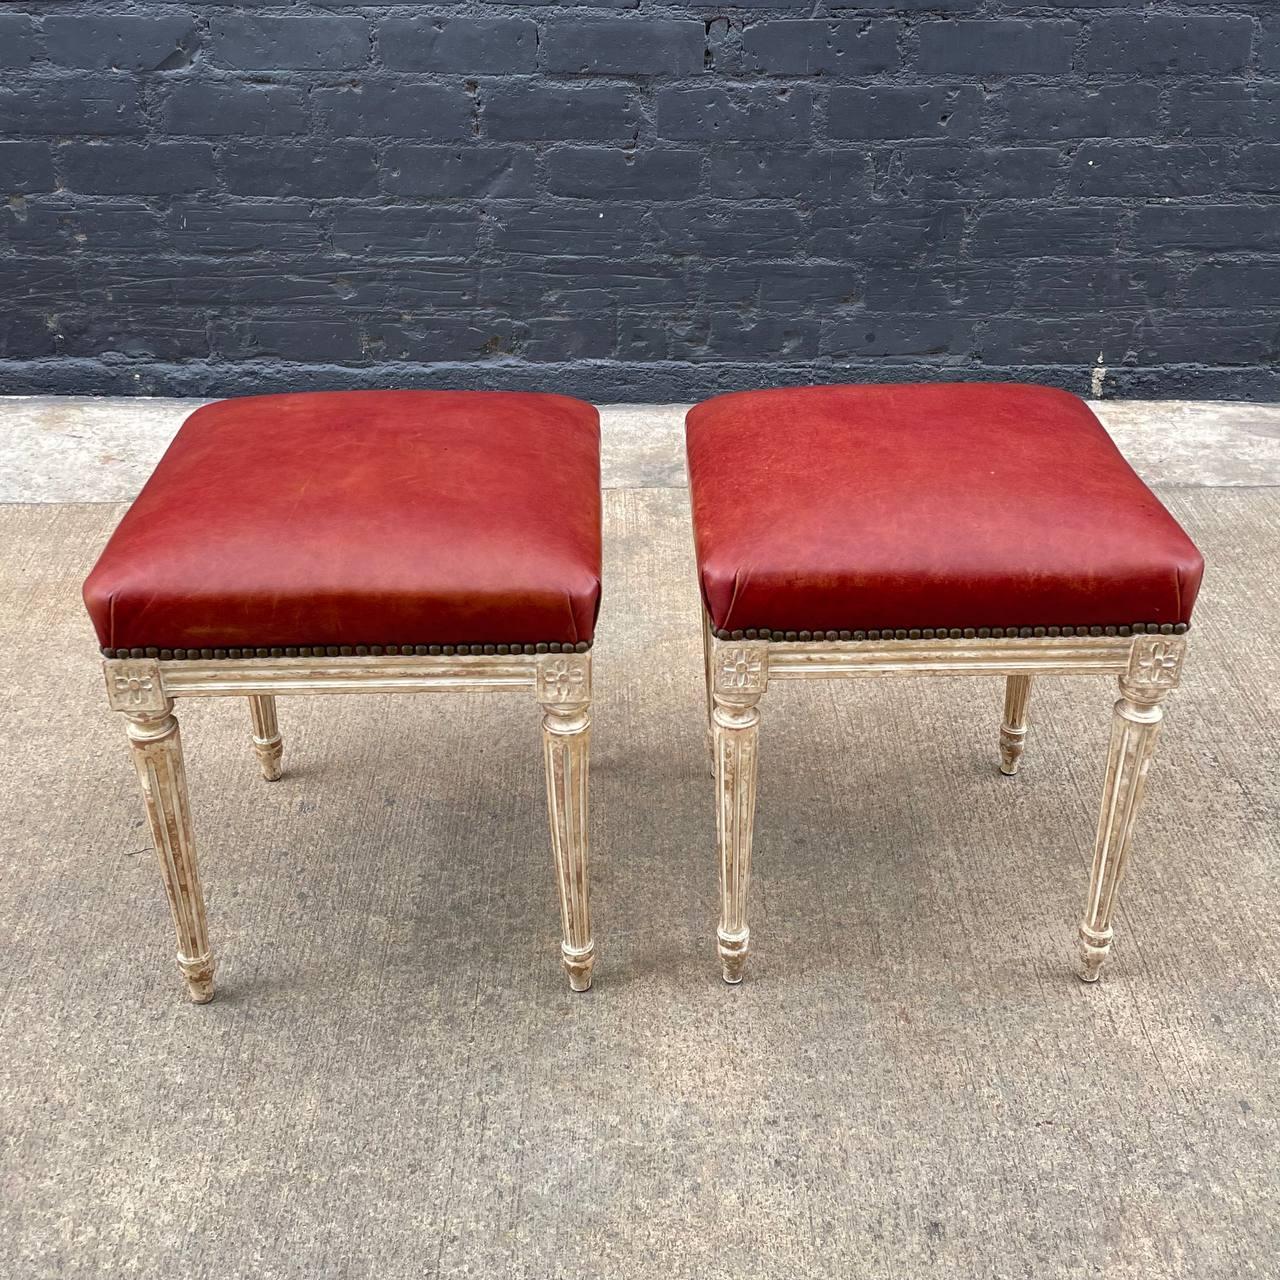 Pair of French Antique Louis XVI Style Hand Carved Stool Benches In Good Condition For Sale In Los Angeles, CA